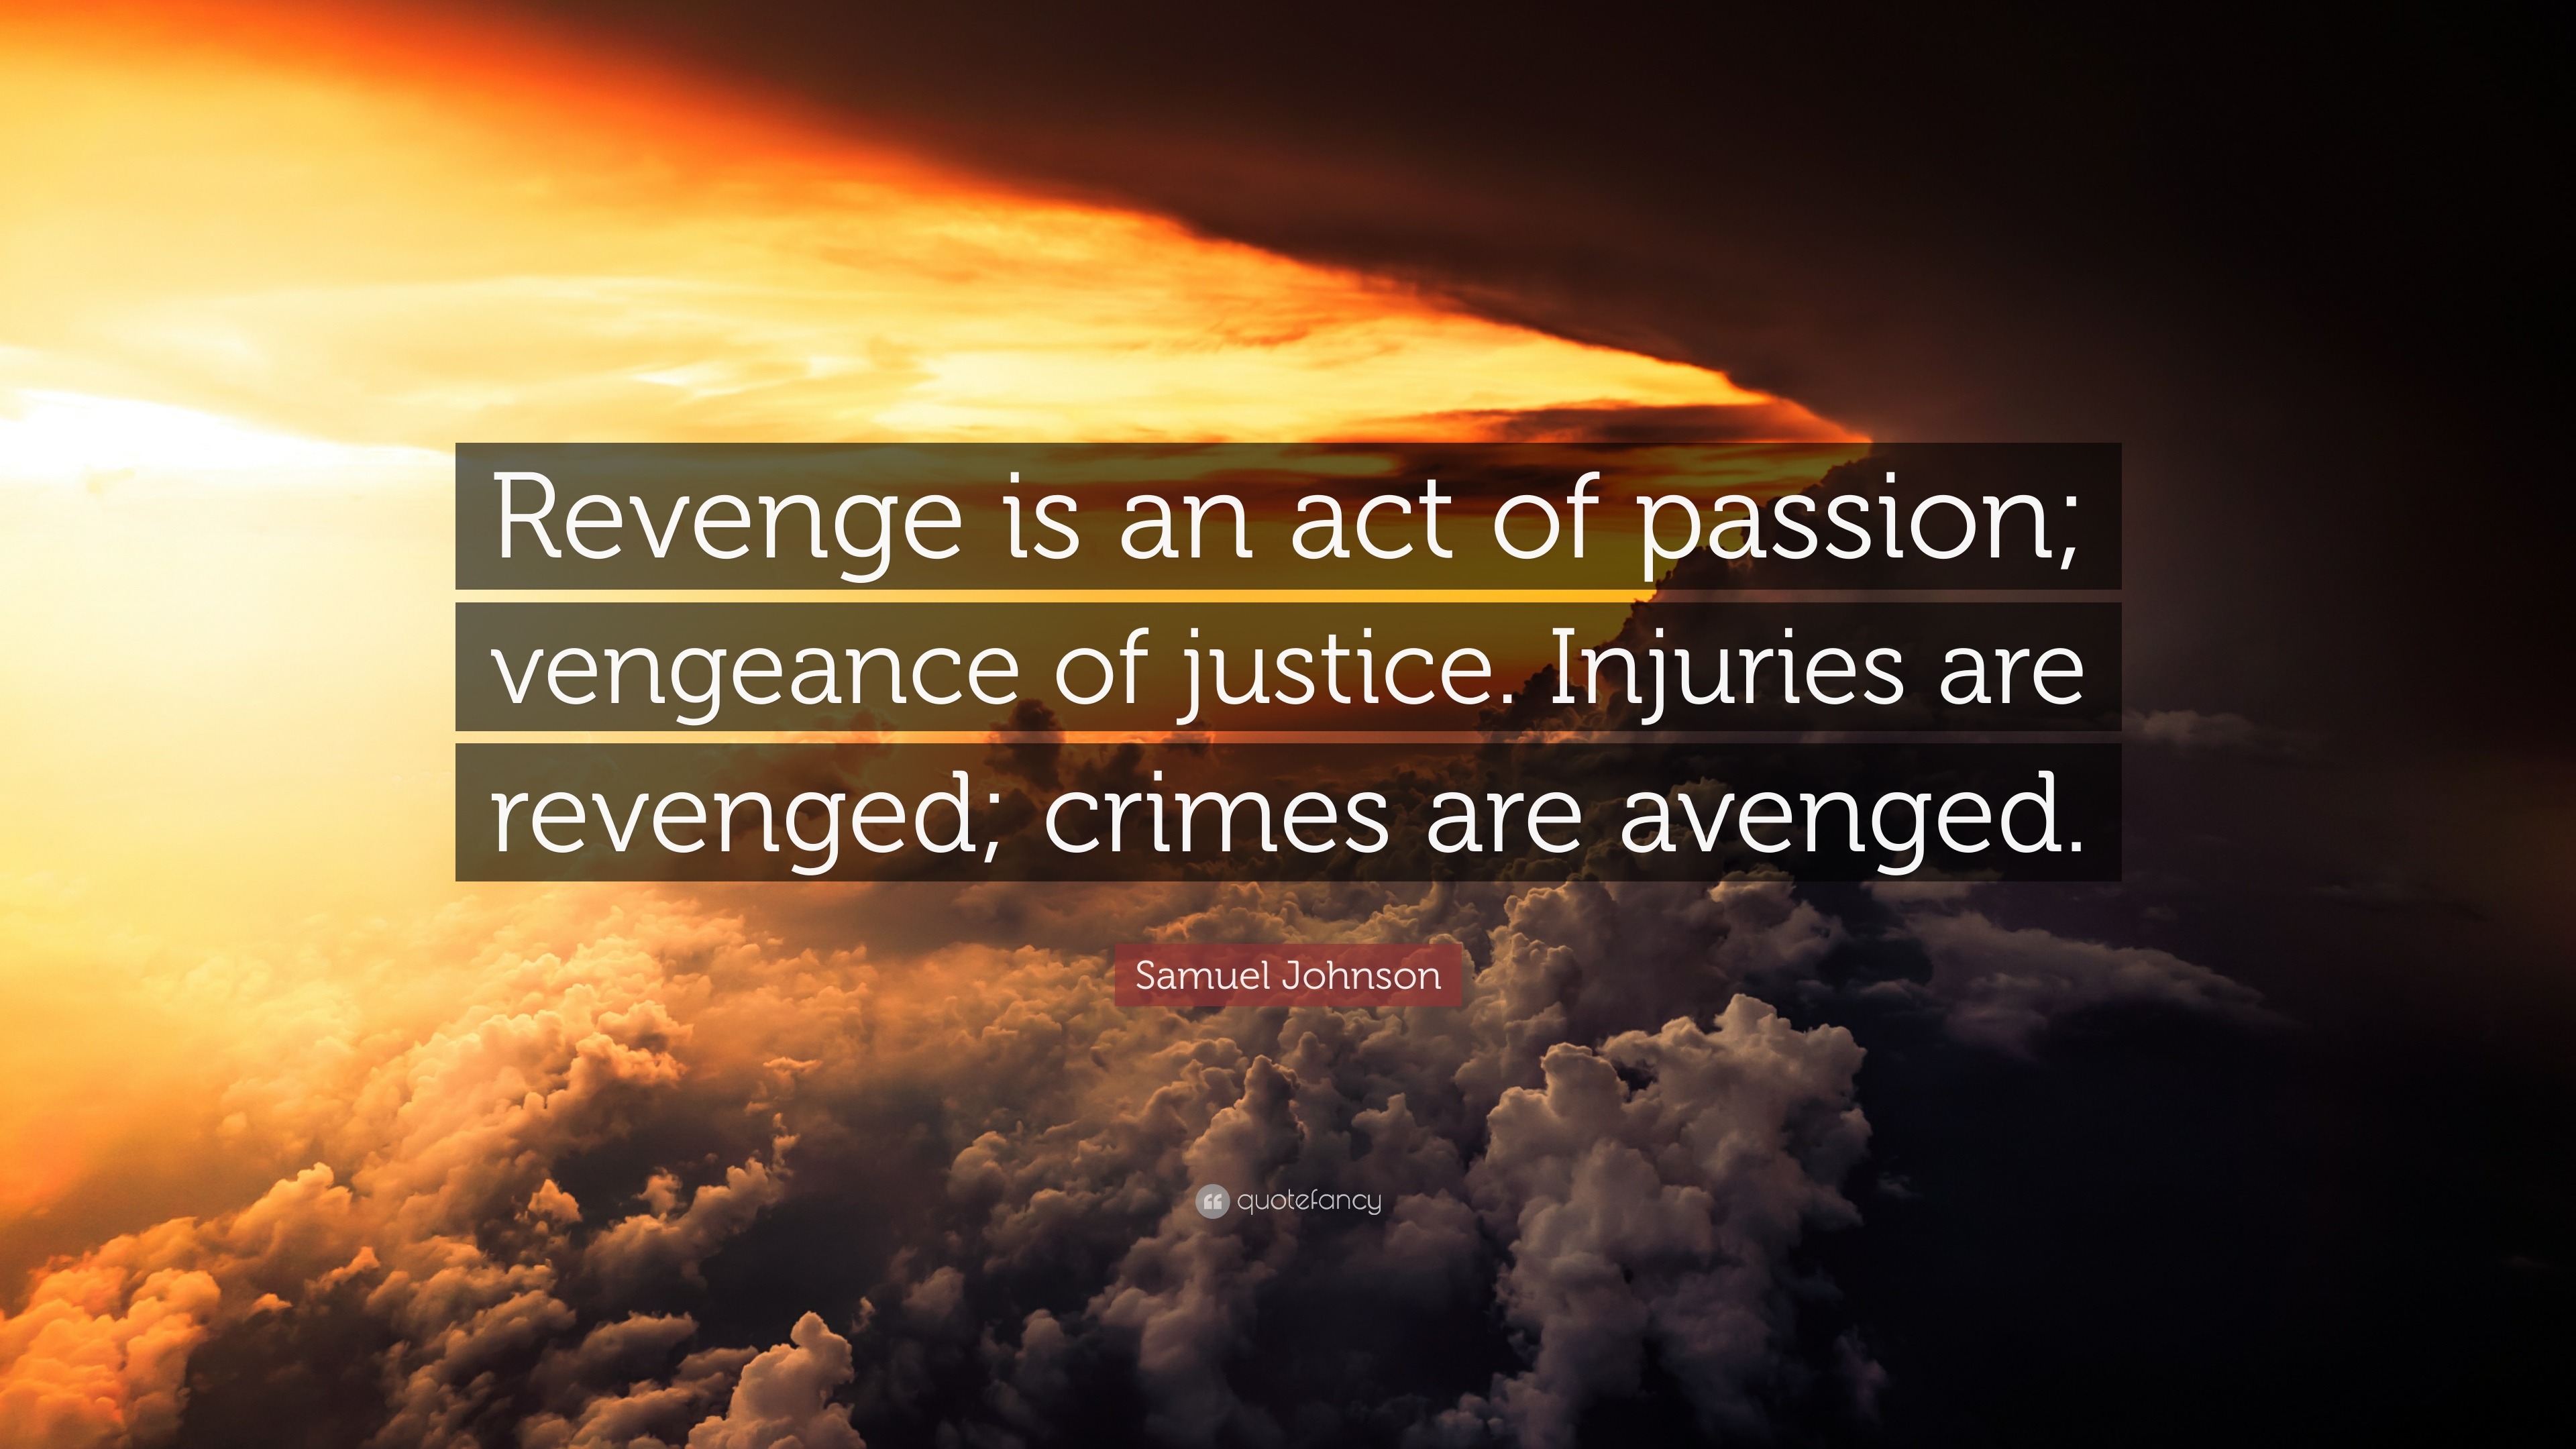 Samuel Johnson quote: Revenge is an act of passion; vengeance of